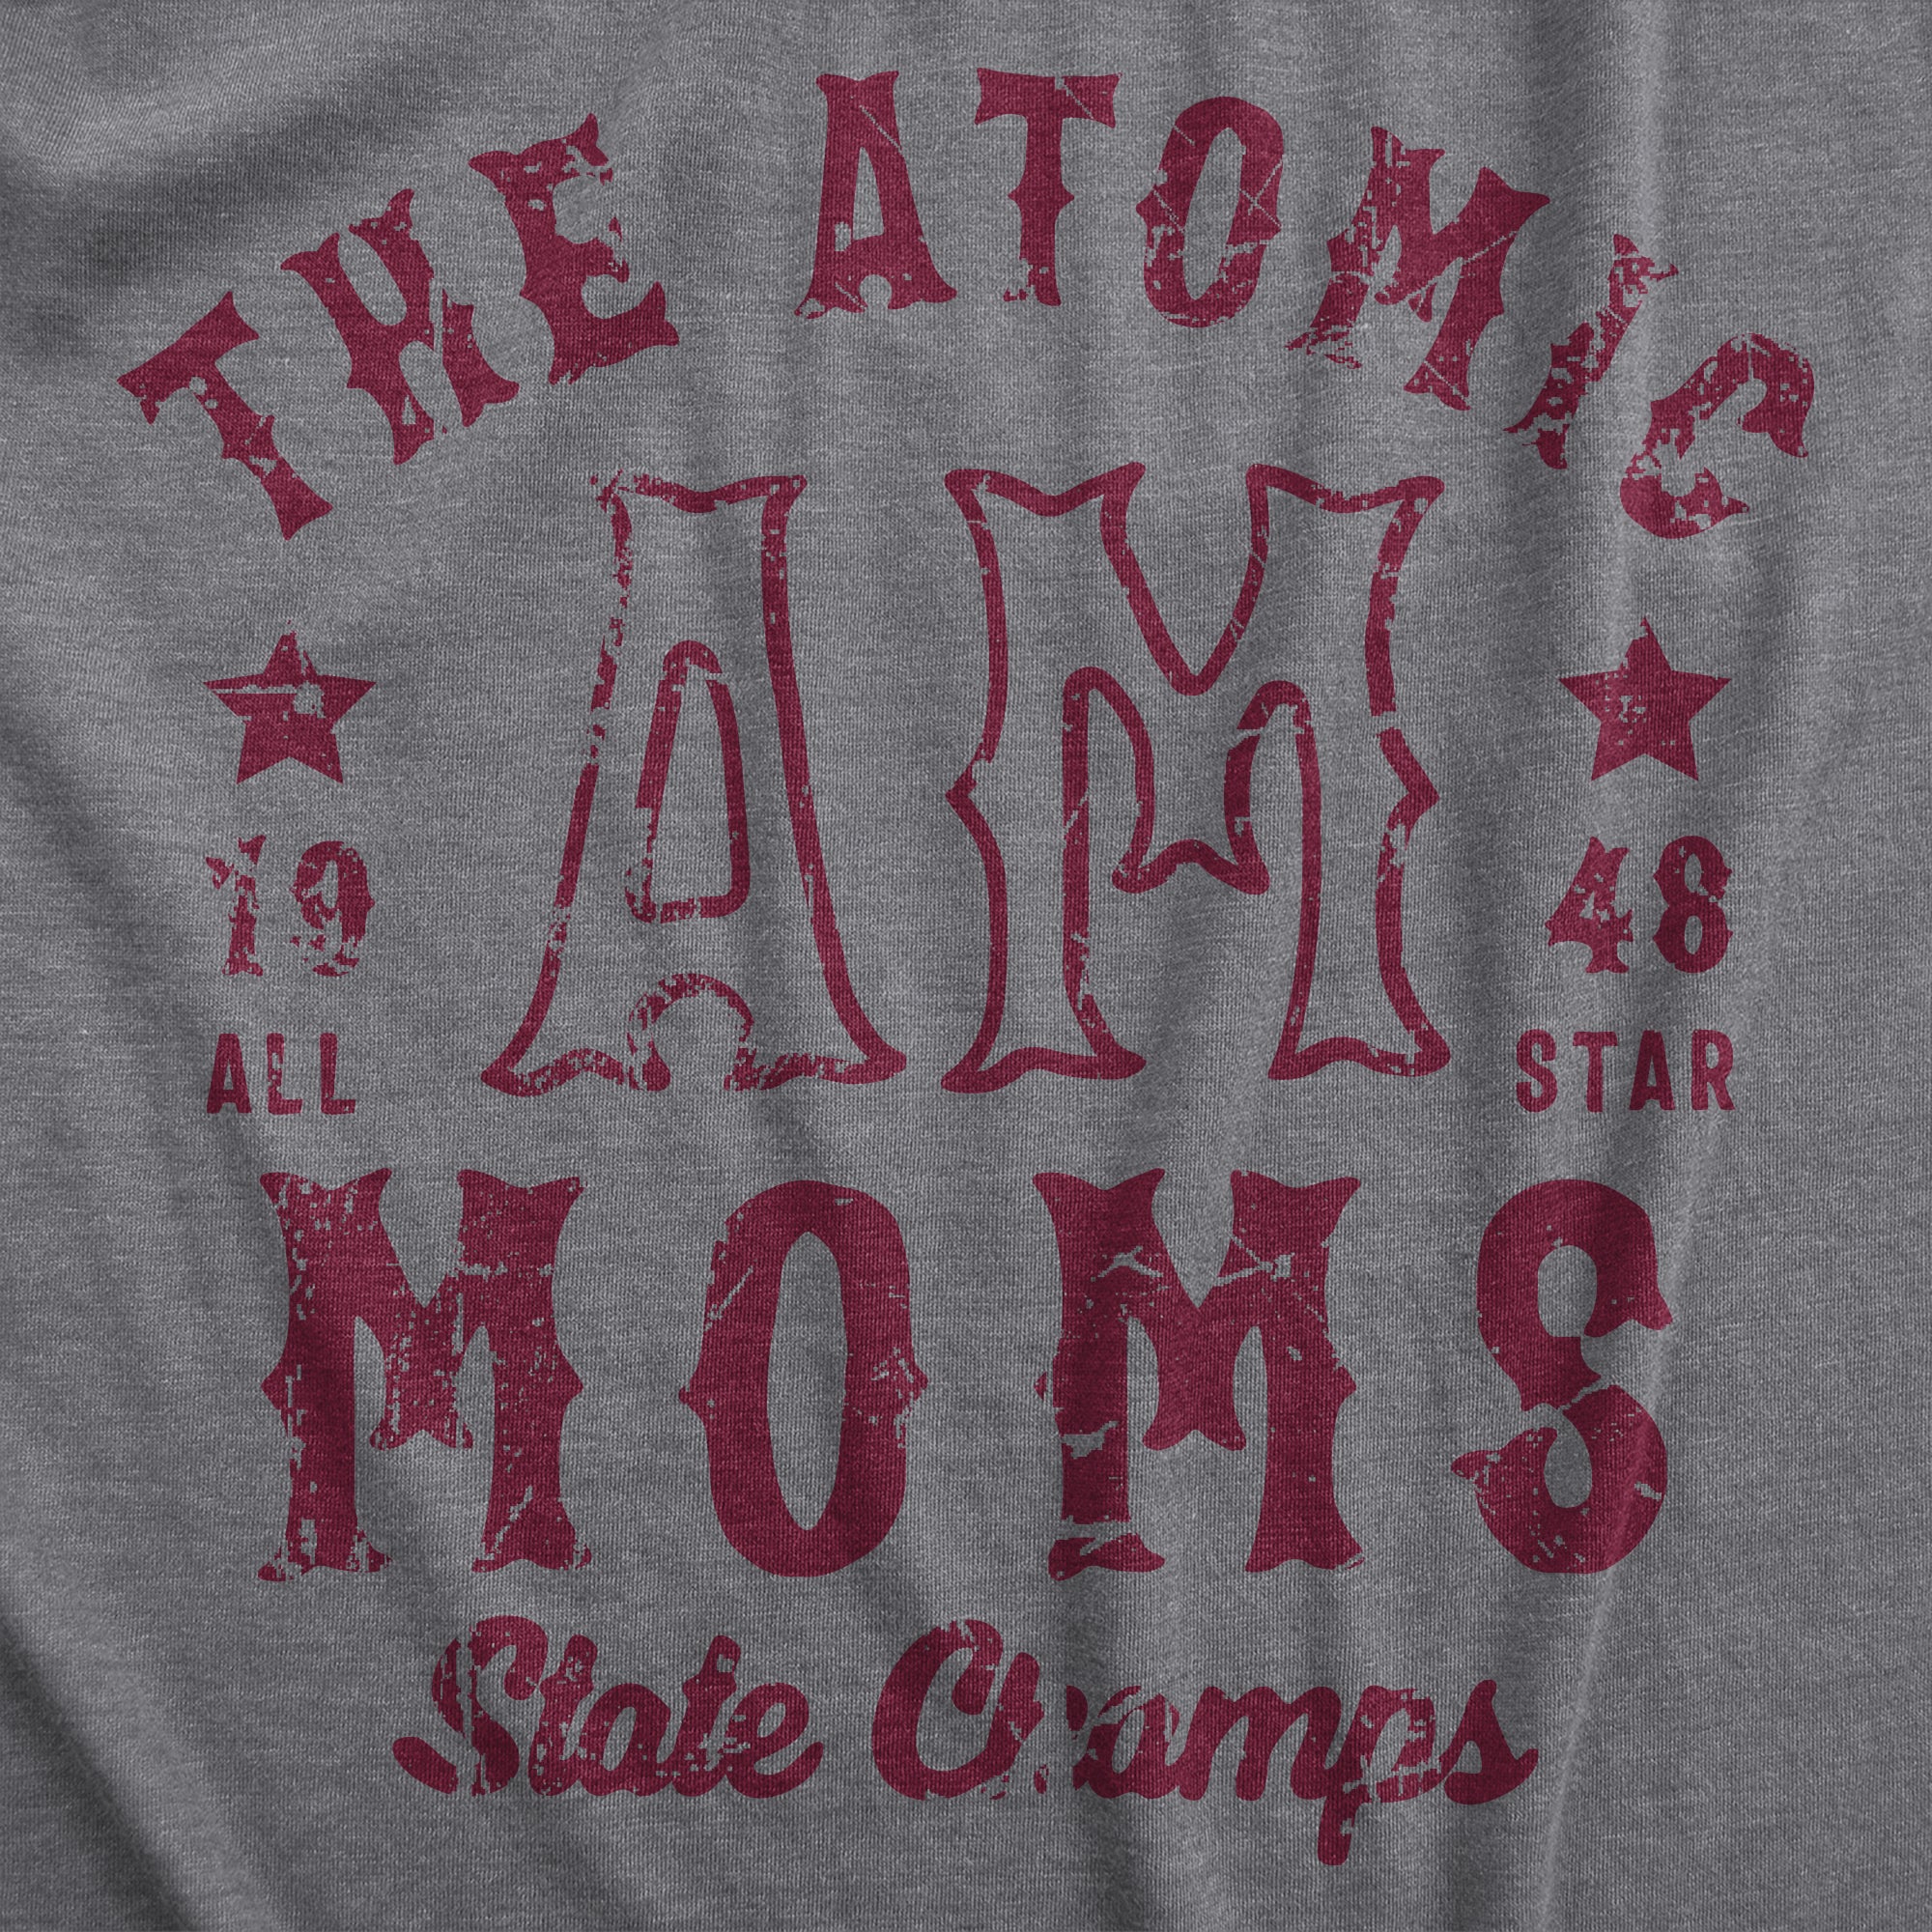 Funny Dark Heather Grey - Atomic Moms The Atomic Moms State Champs Womens T Shirt Nerdy Mother's Day Sarcastic Tee